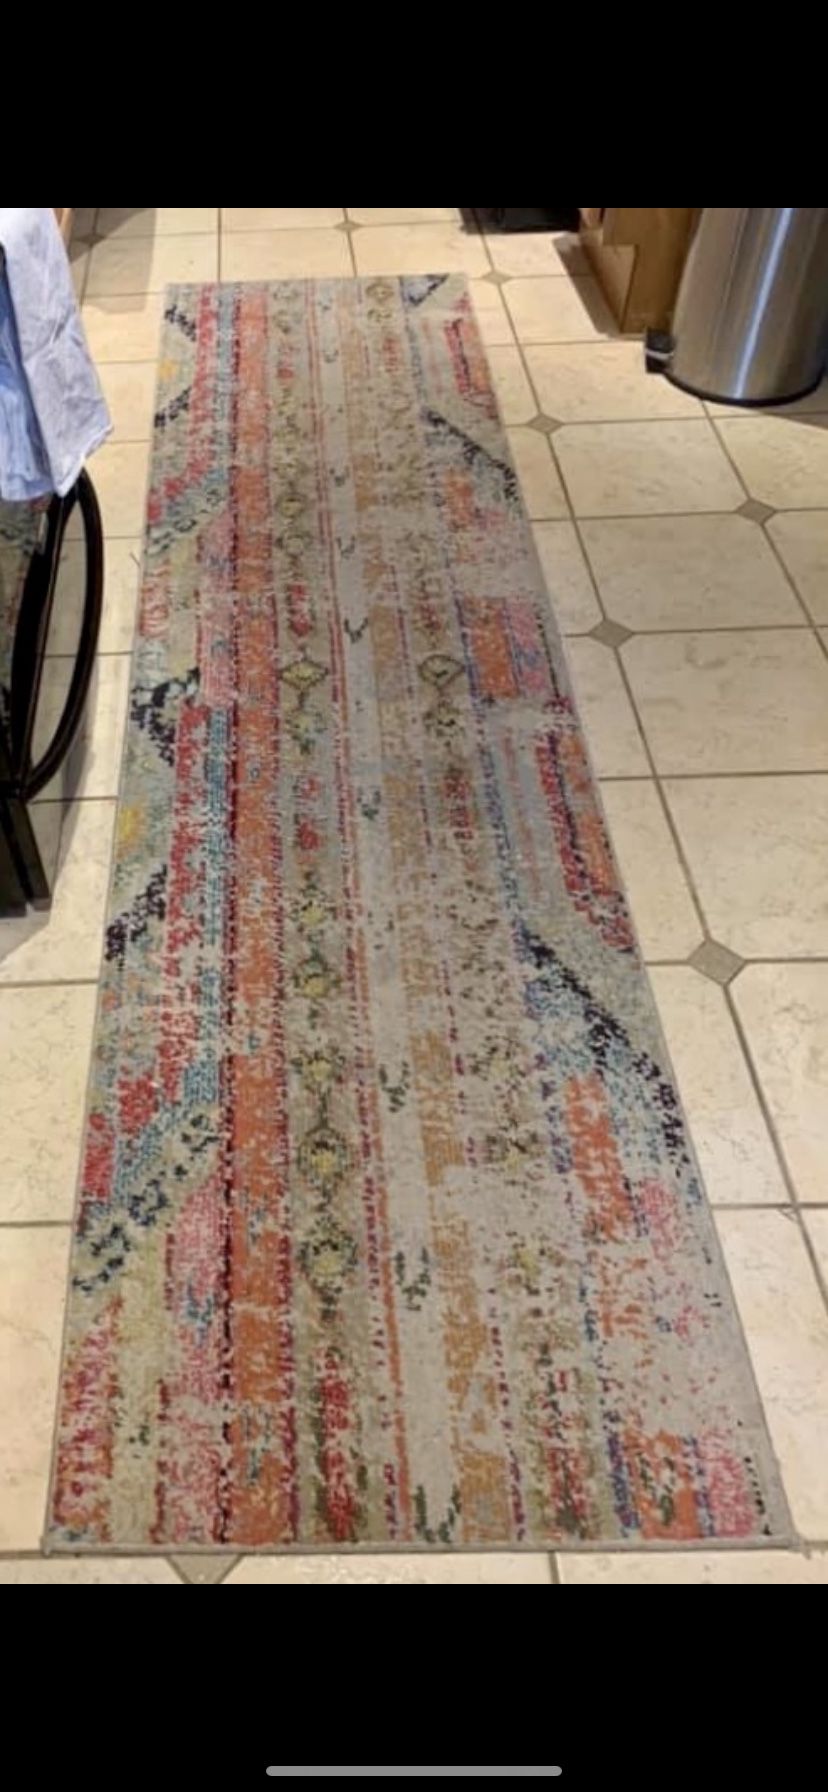 [USED] “muted/fade-out” style runner rug